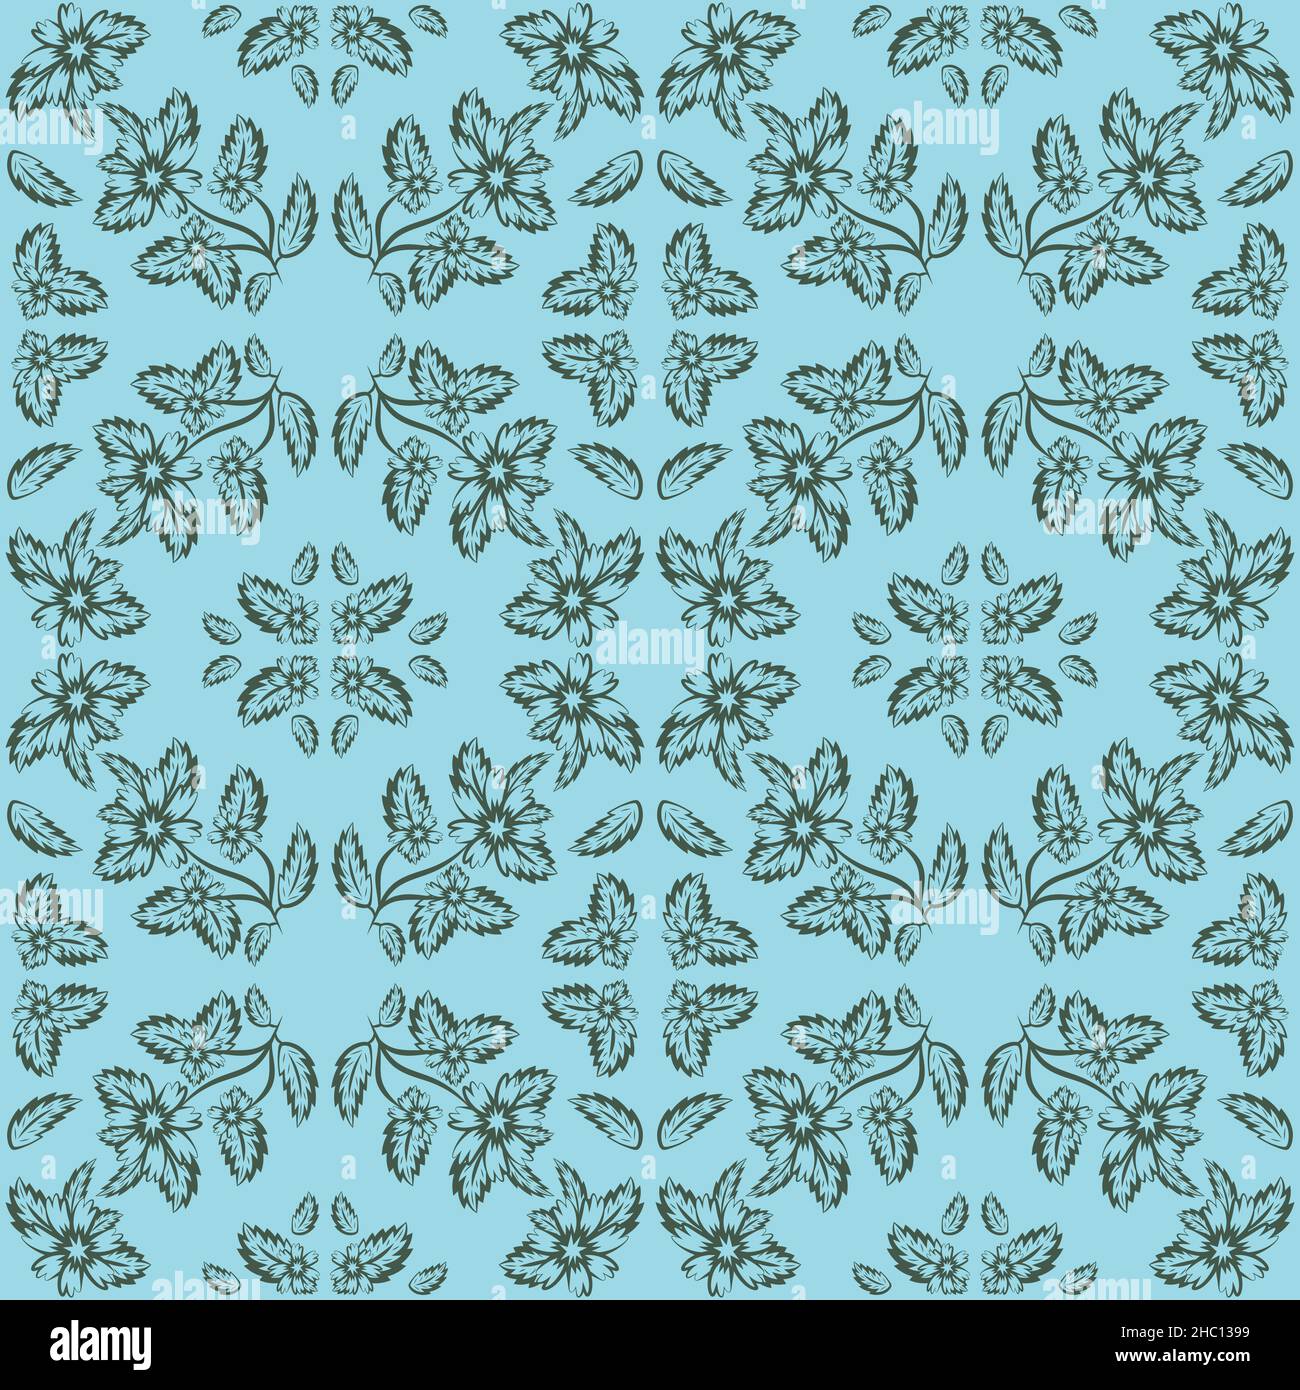 Floral pattern paisley style Paisley print Stock Vector